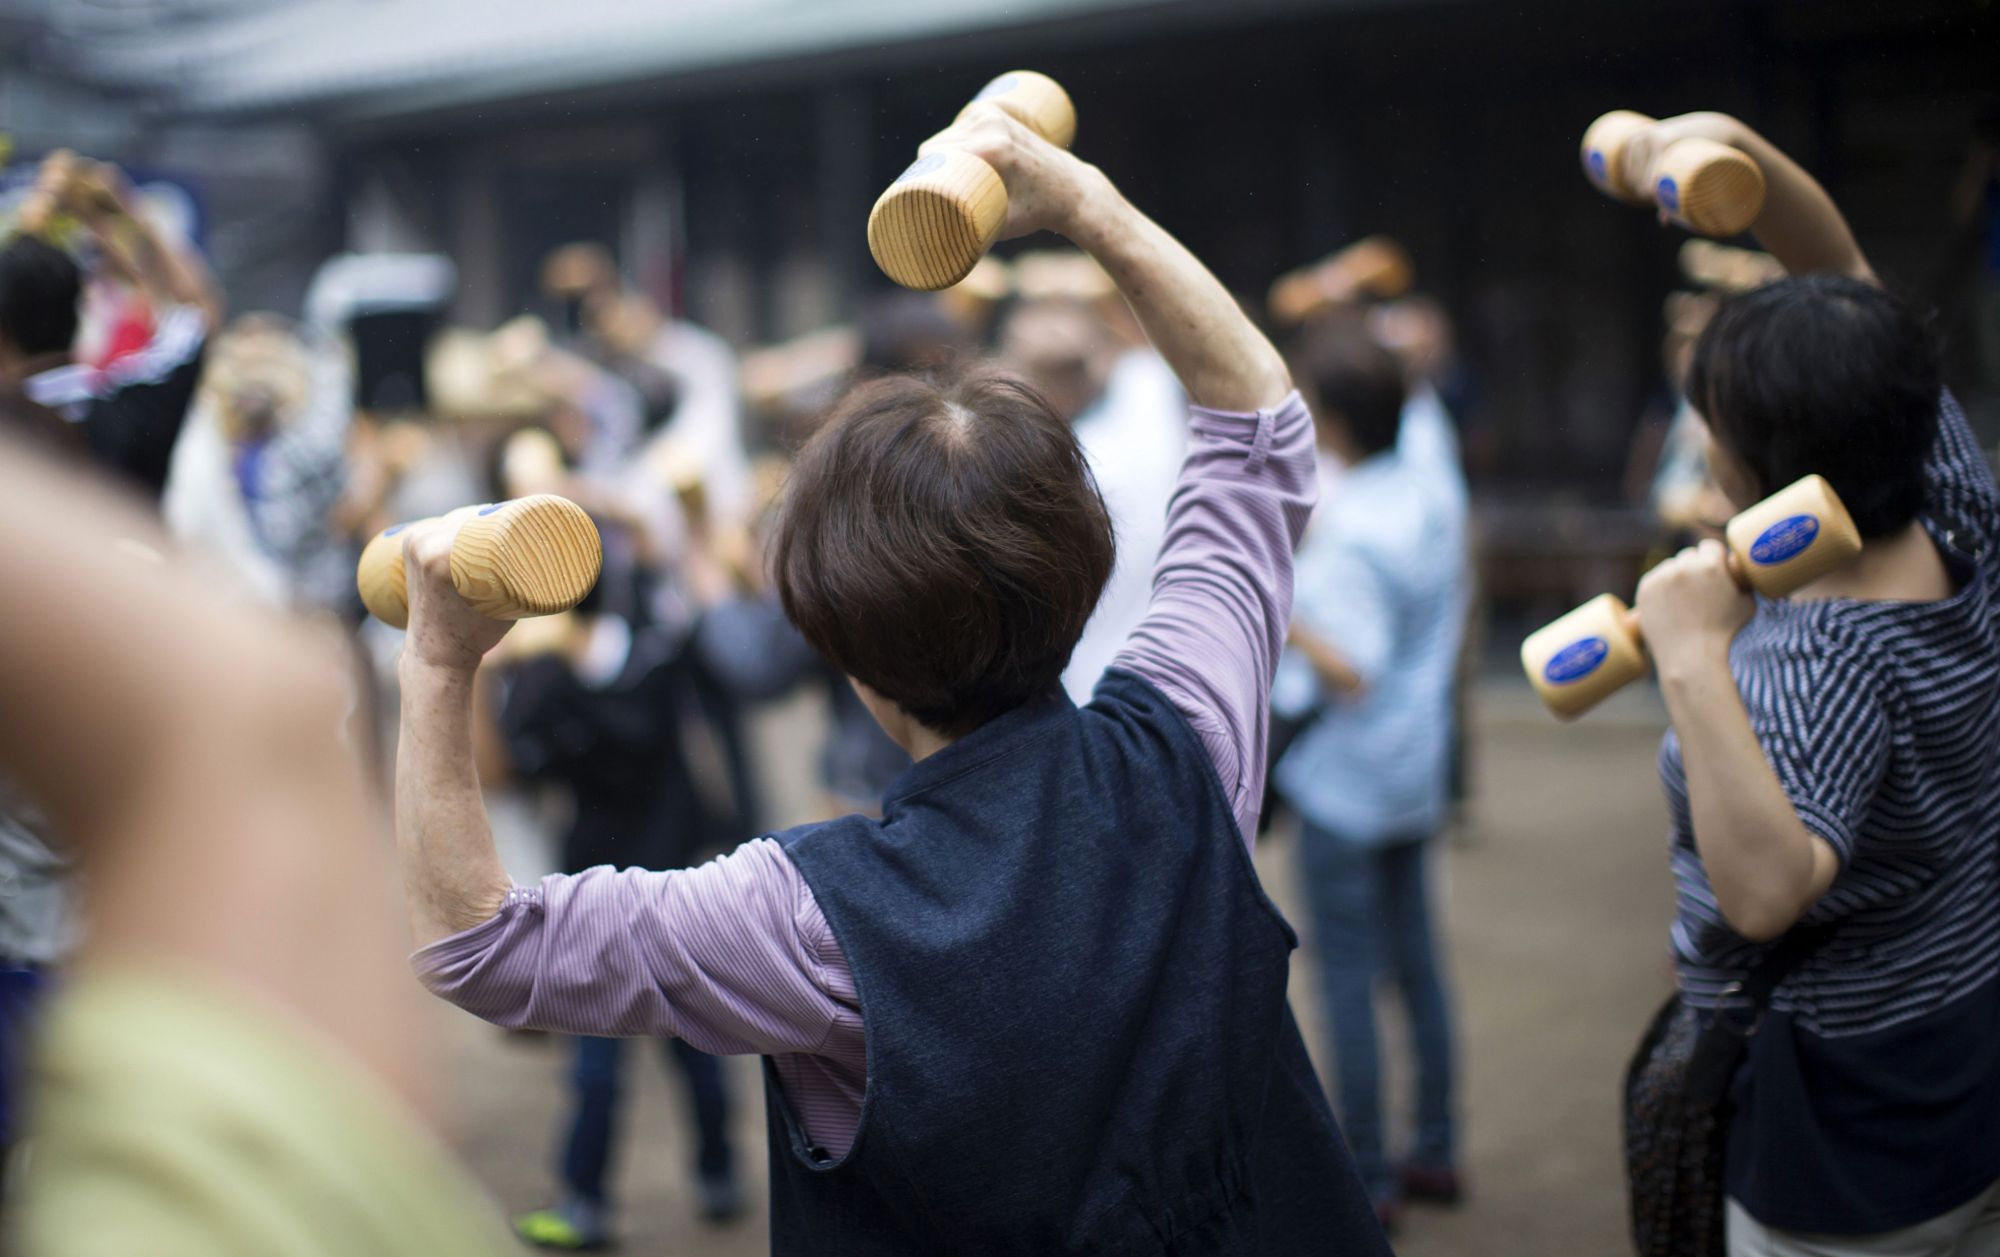 People holding wooden dumbbells exercise during an event at a temple in the Sugamo district of Tokyo. | BLOOMBERG